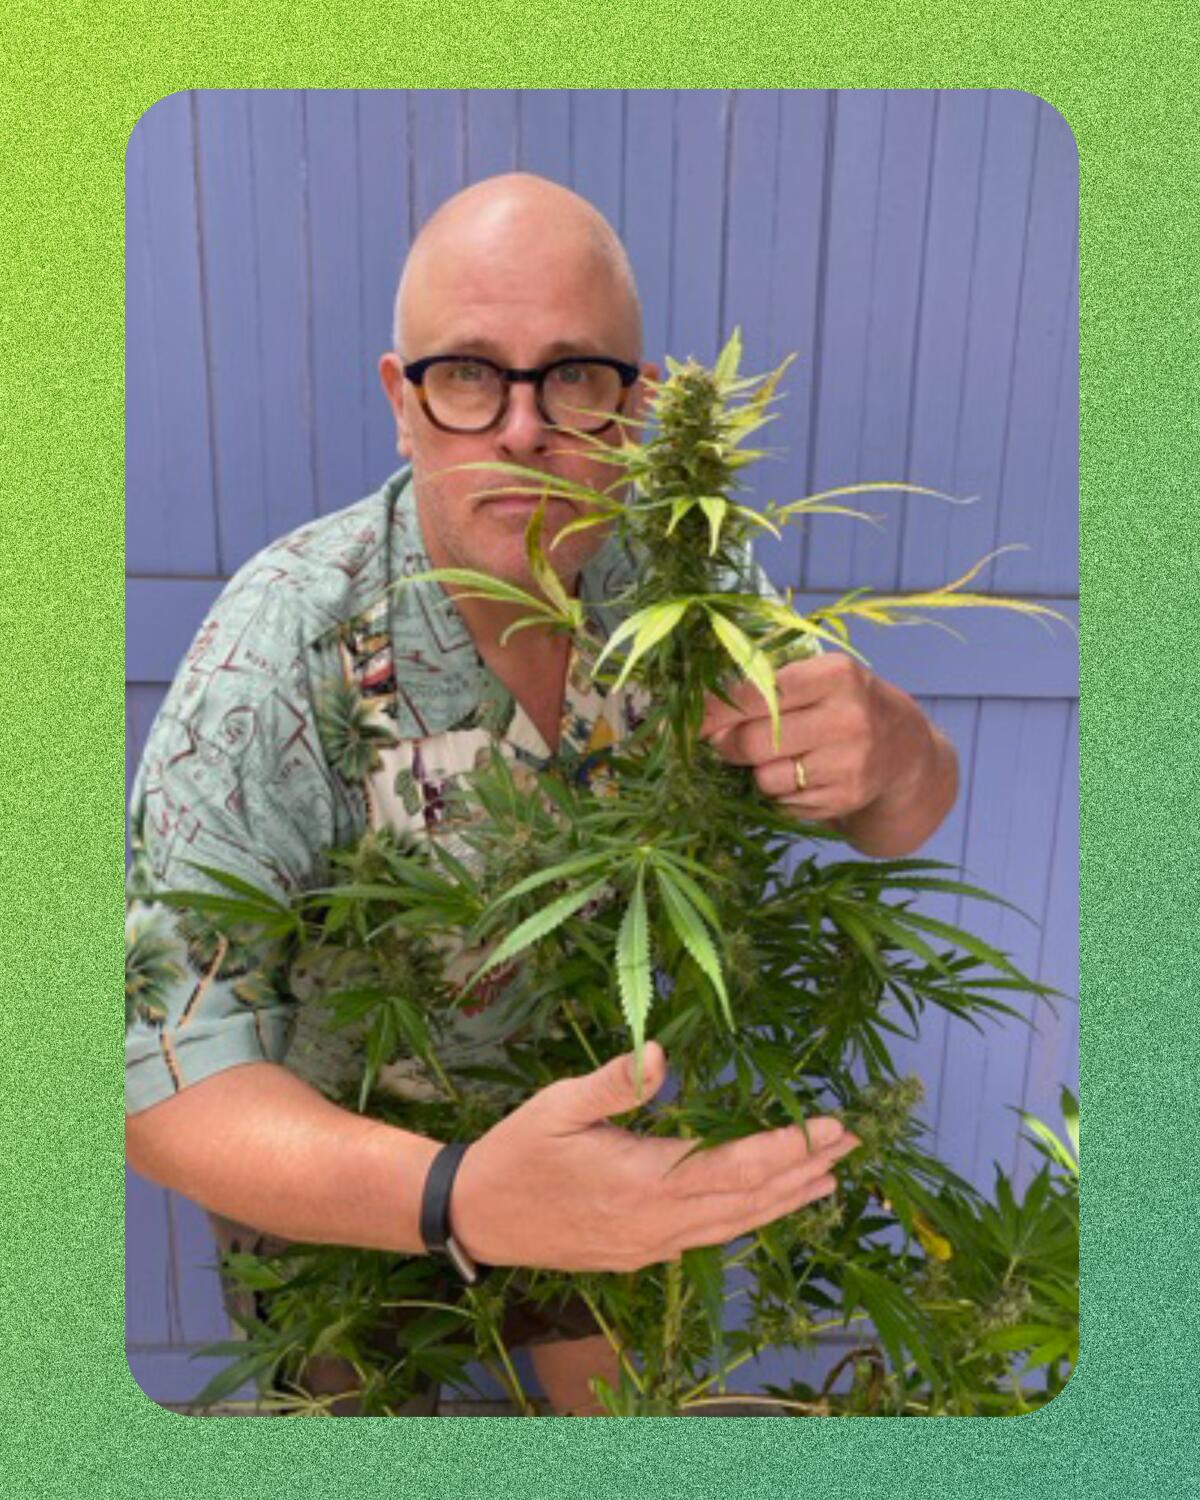  A man standing with his arms around a cannabis plant.